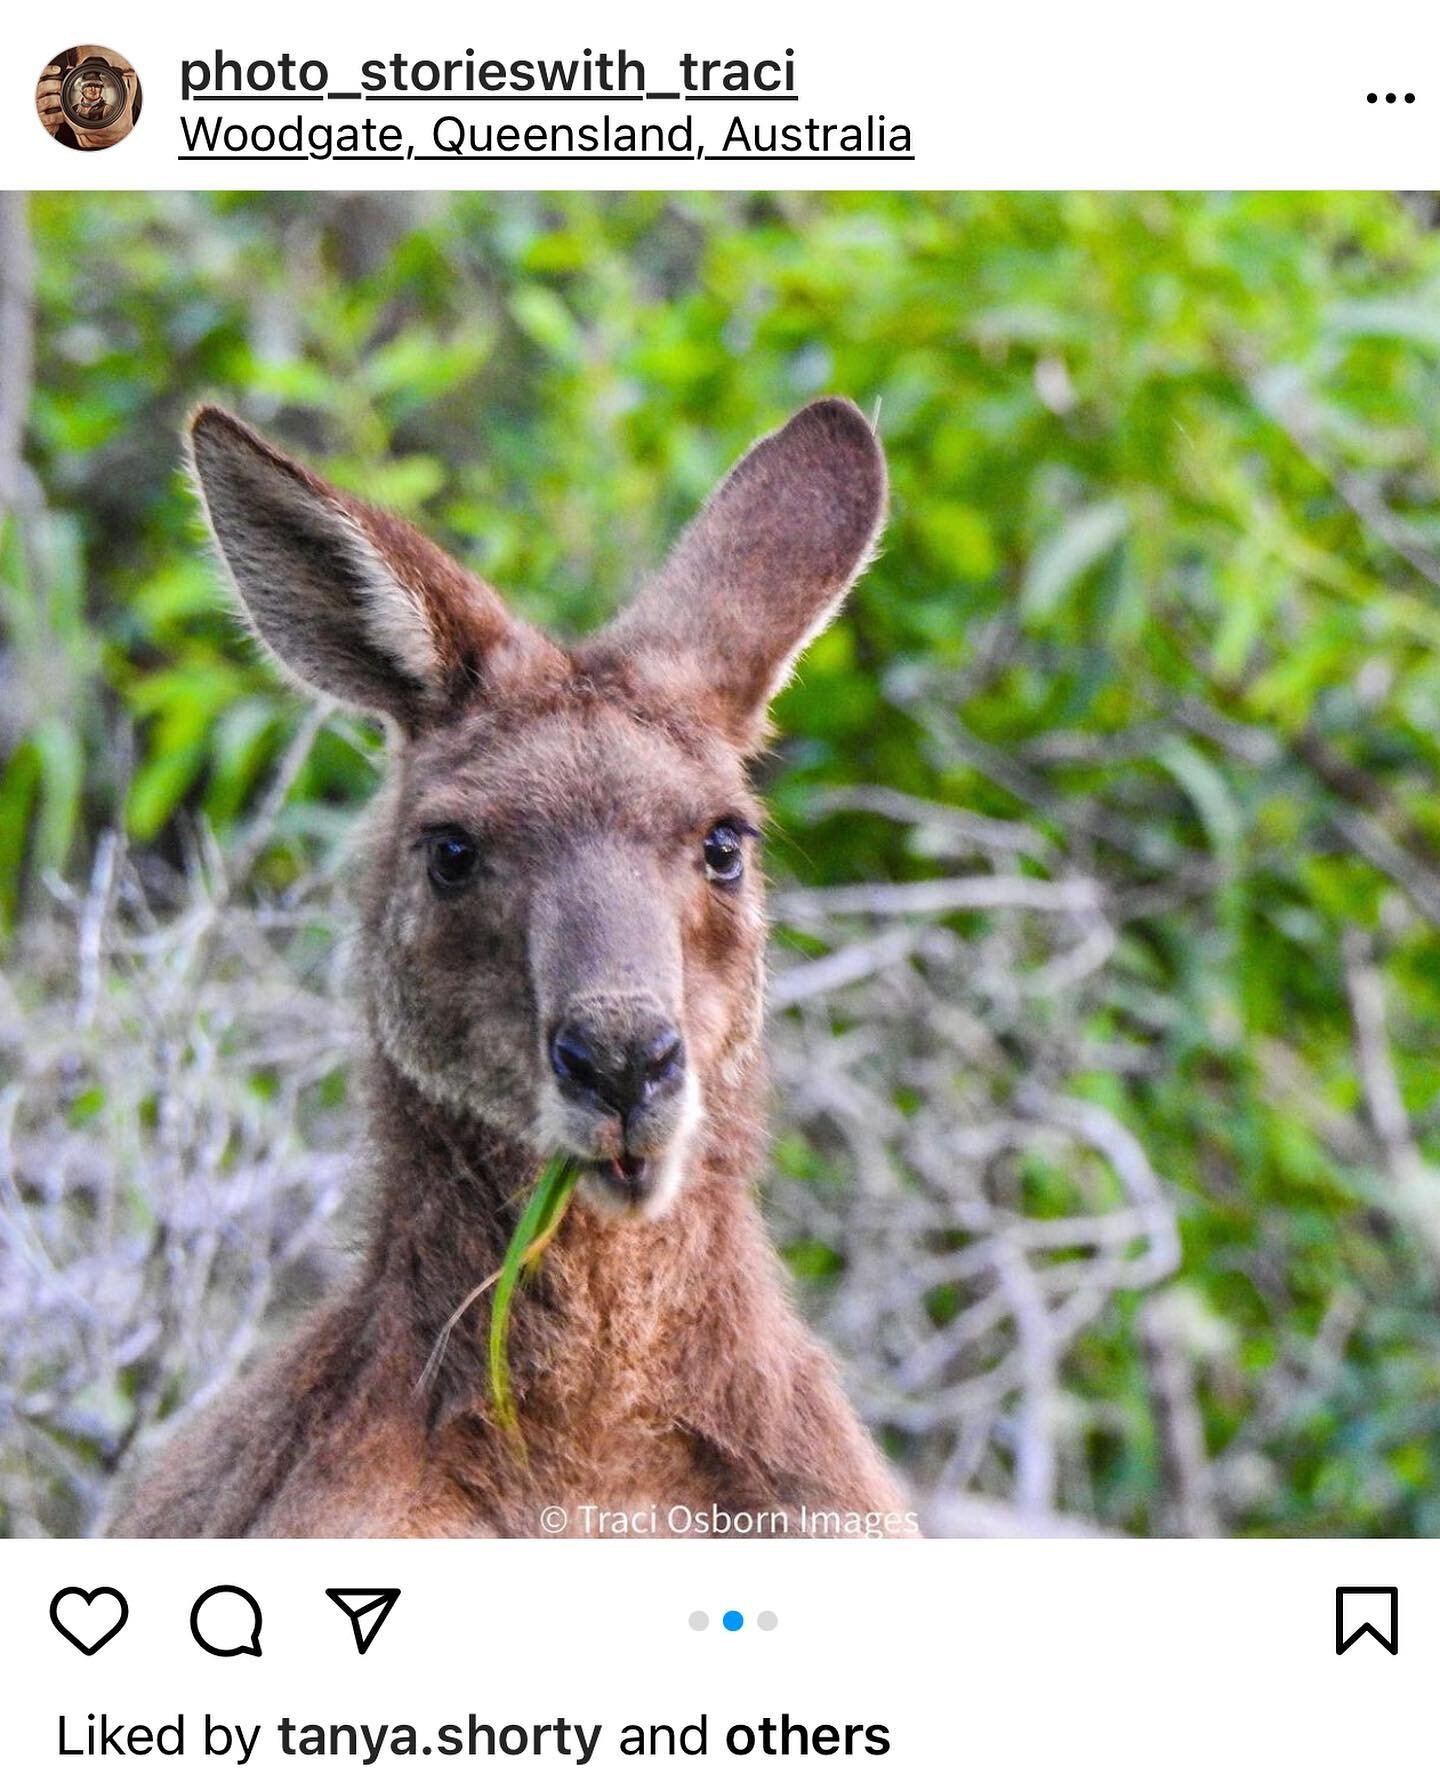 Just one of the locals here captured by the amazing @photo_storieswith_traci. Please check out her page for more gorgeous pics of Woodgate and surrounds.